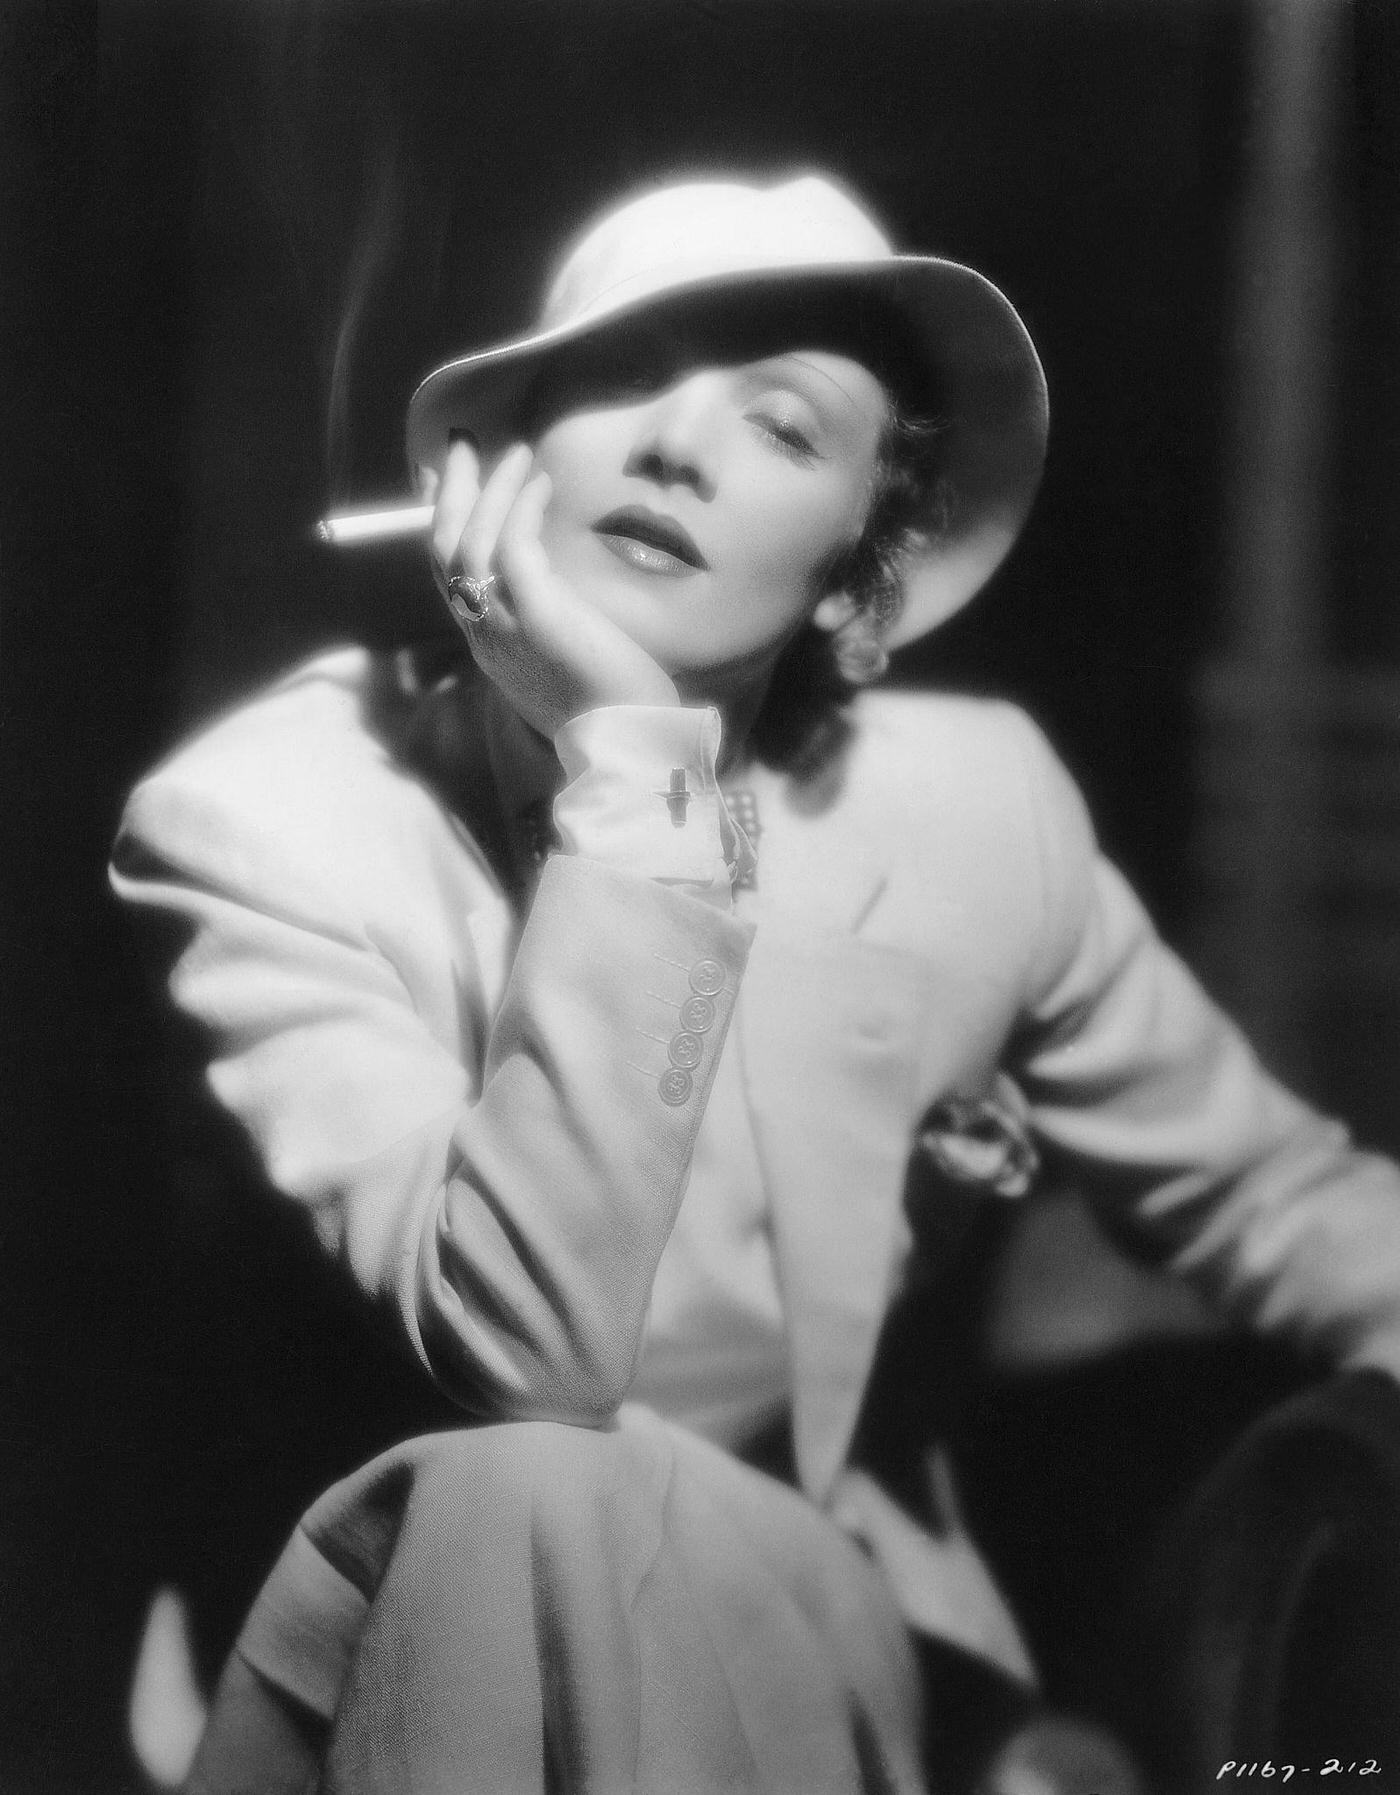 A photograph of a German-born Marlene Dietrich holding a cigarette, dressed in a tailored suit, hat, bow-tie, and cufflinks.